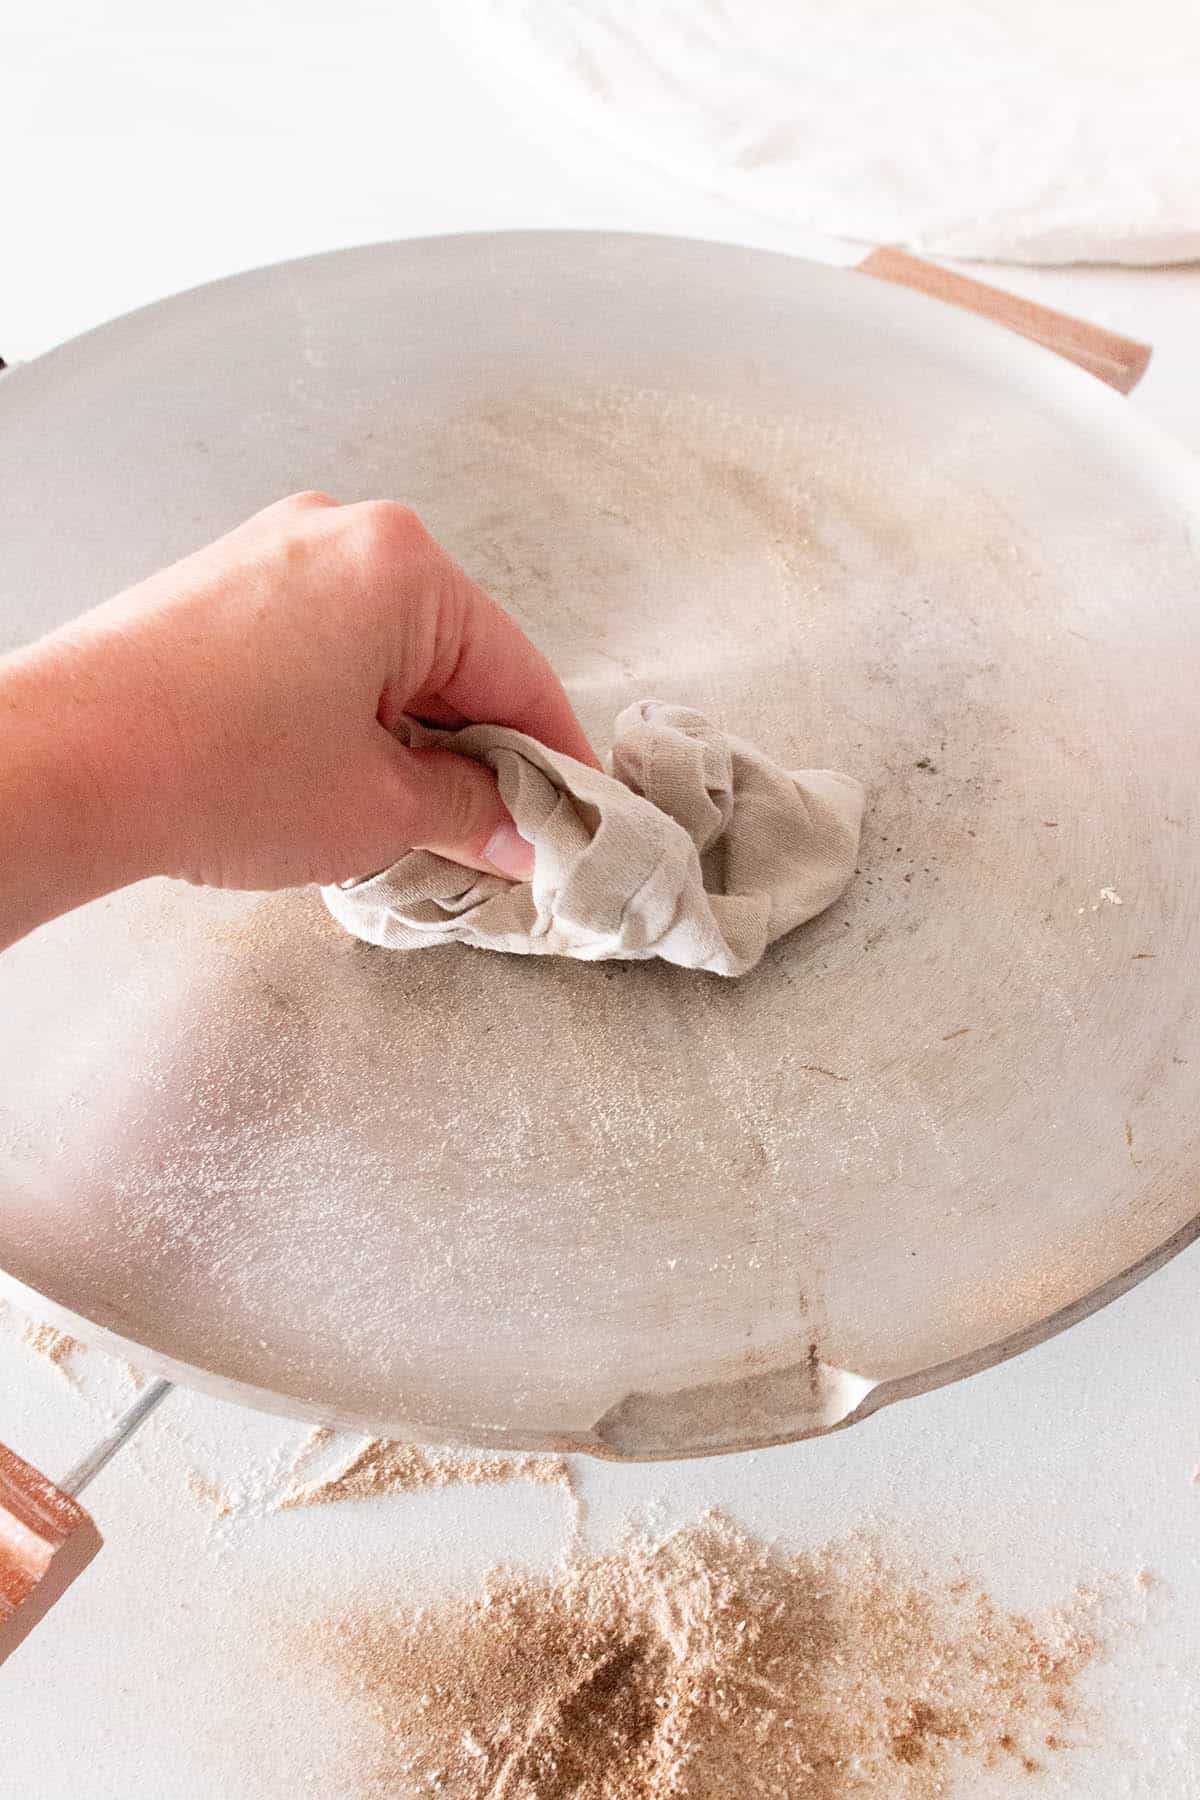 A hand with a dry cloth wiping burn flour off a lefse griddle.